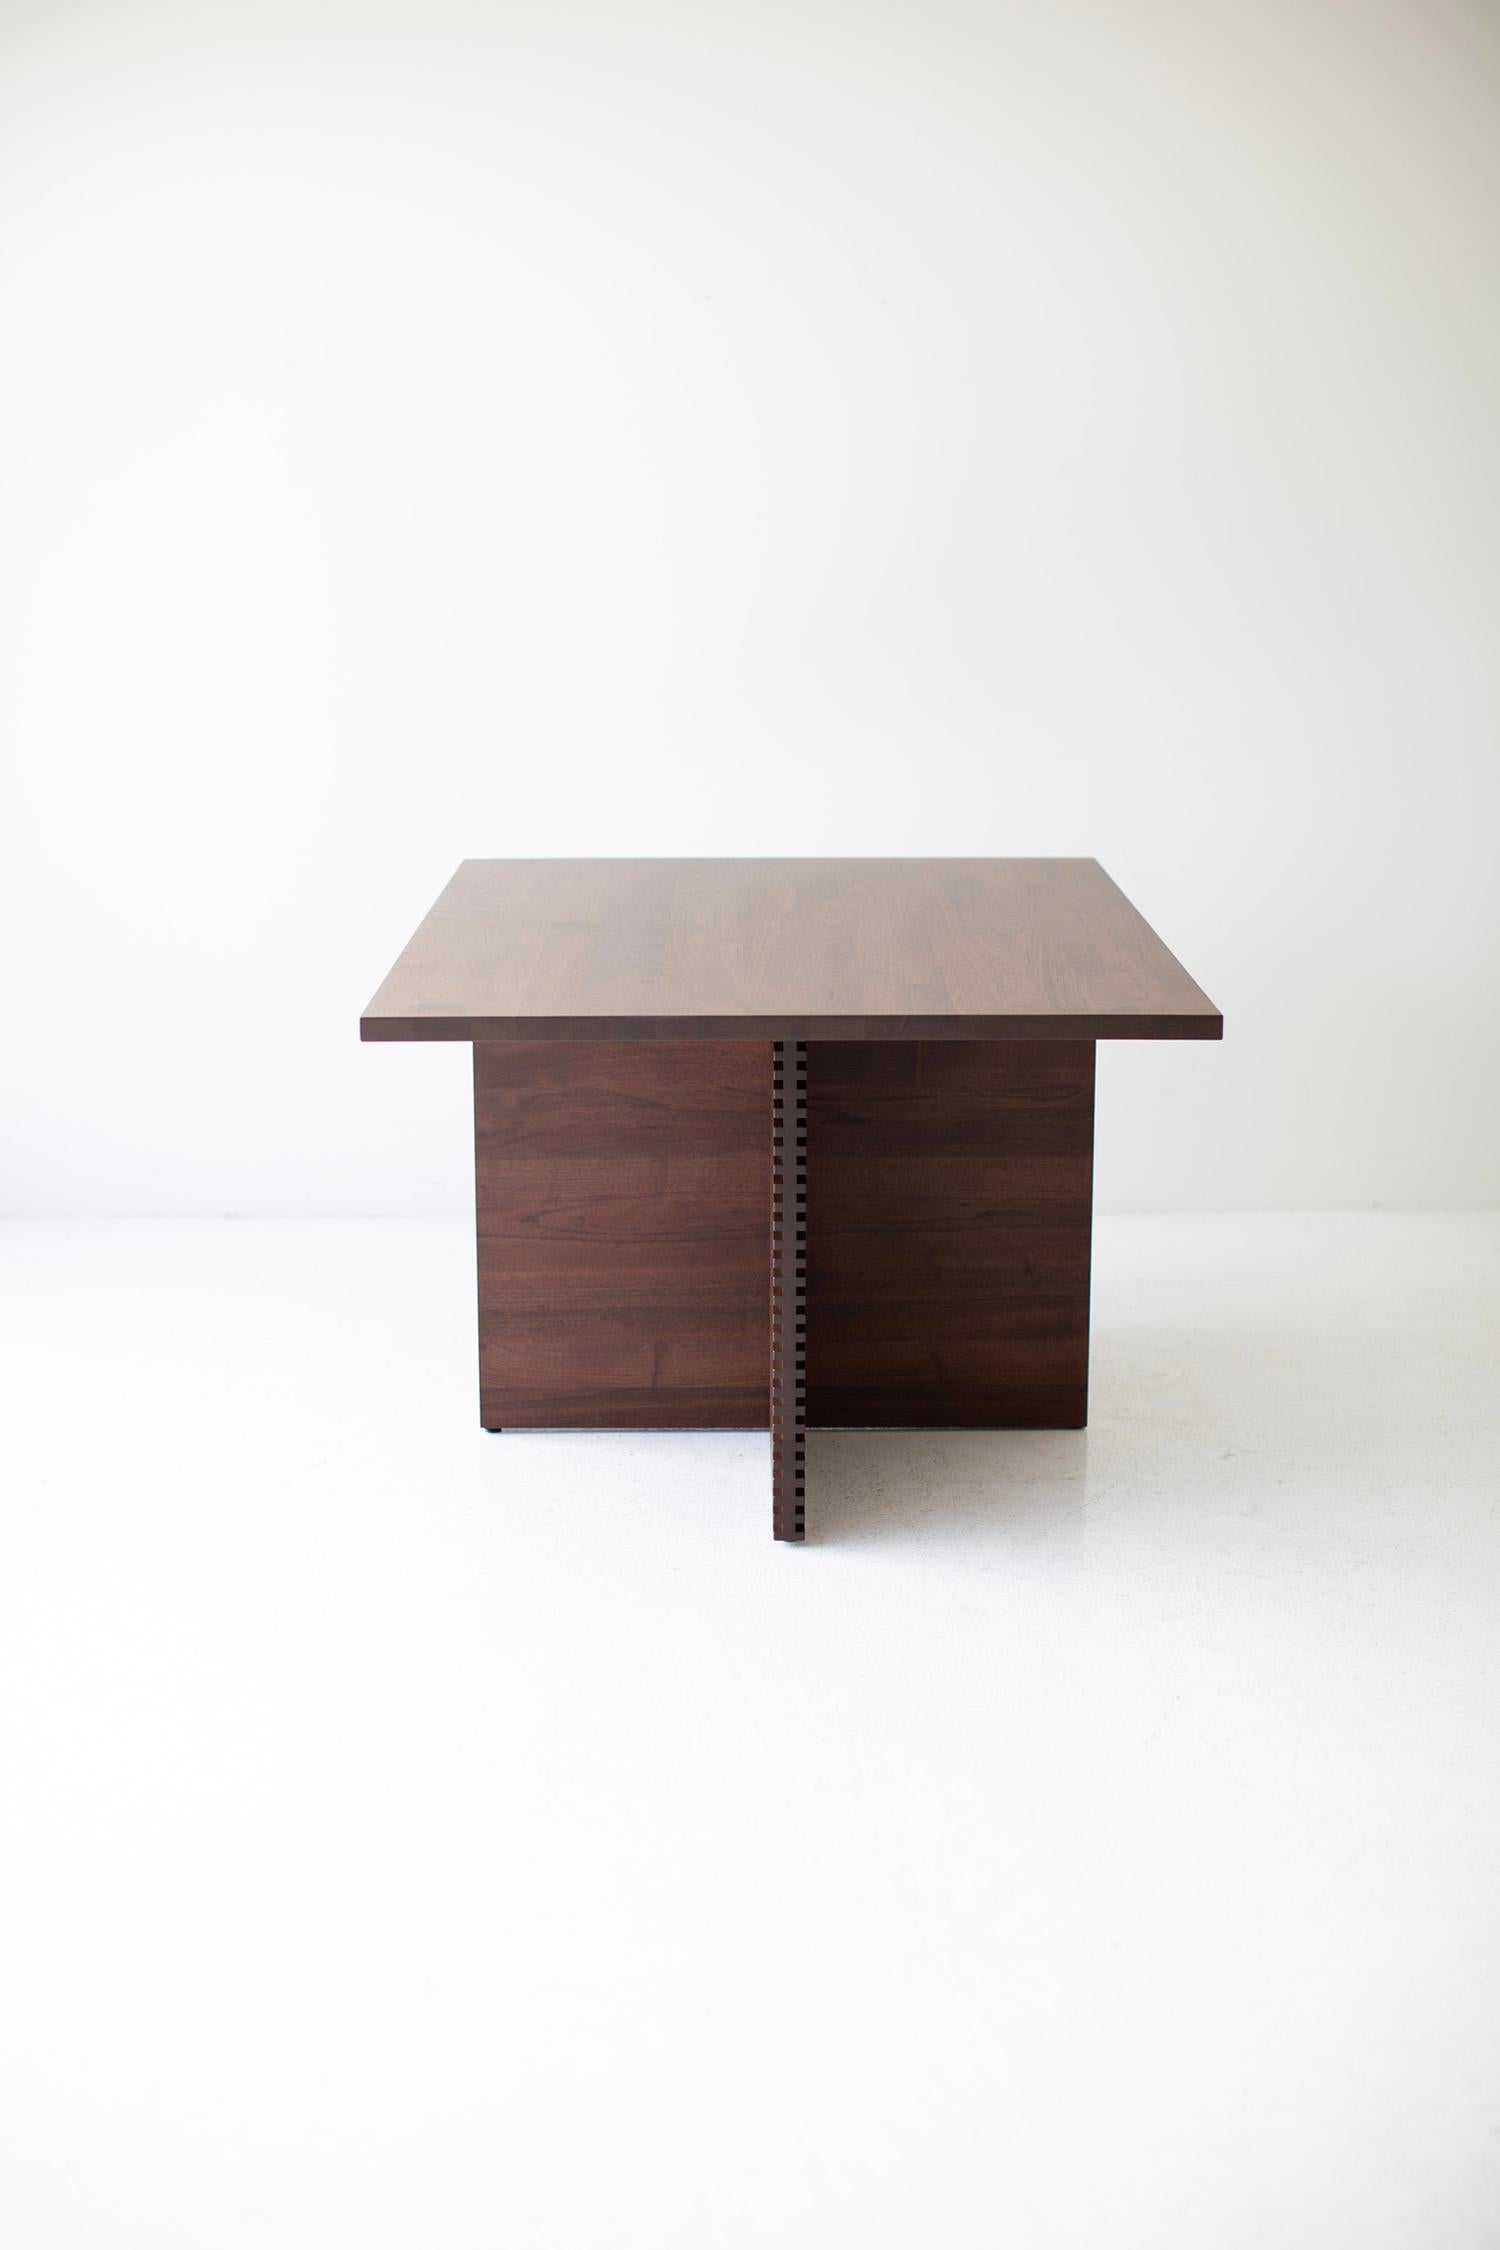 American Bertu Dining Table, Pedestal Dining Table, Walnut Dining Table, Cicely For Sale